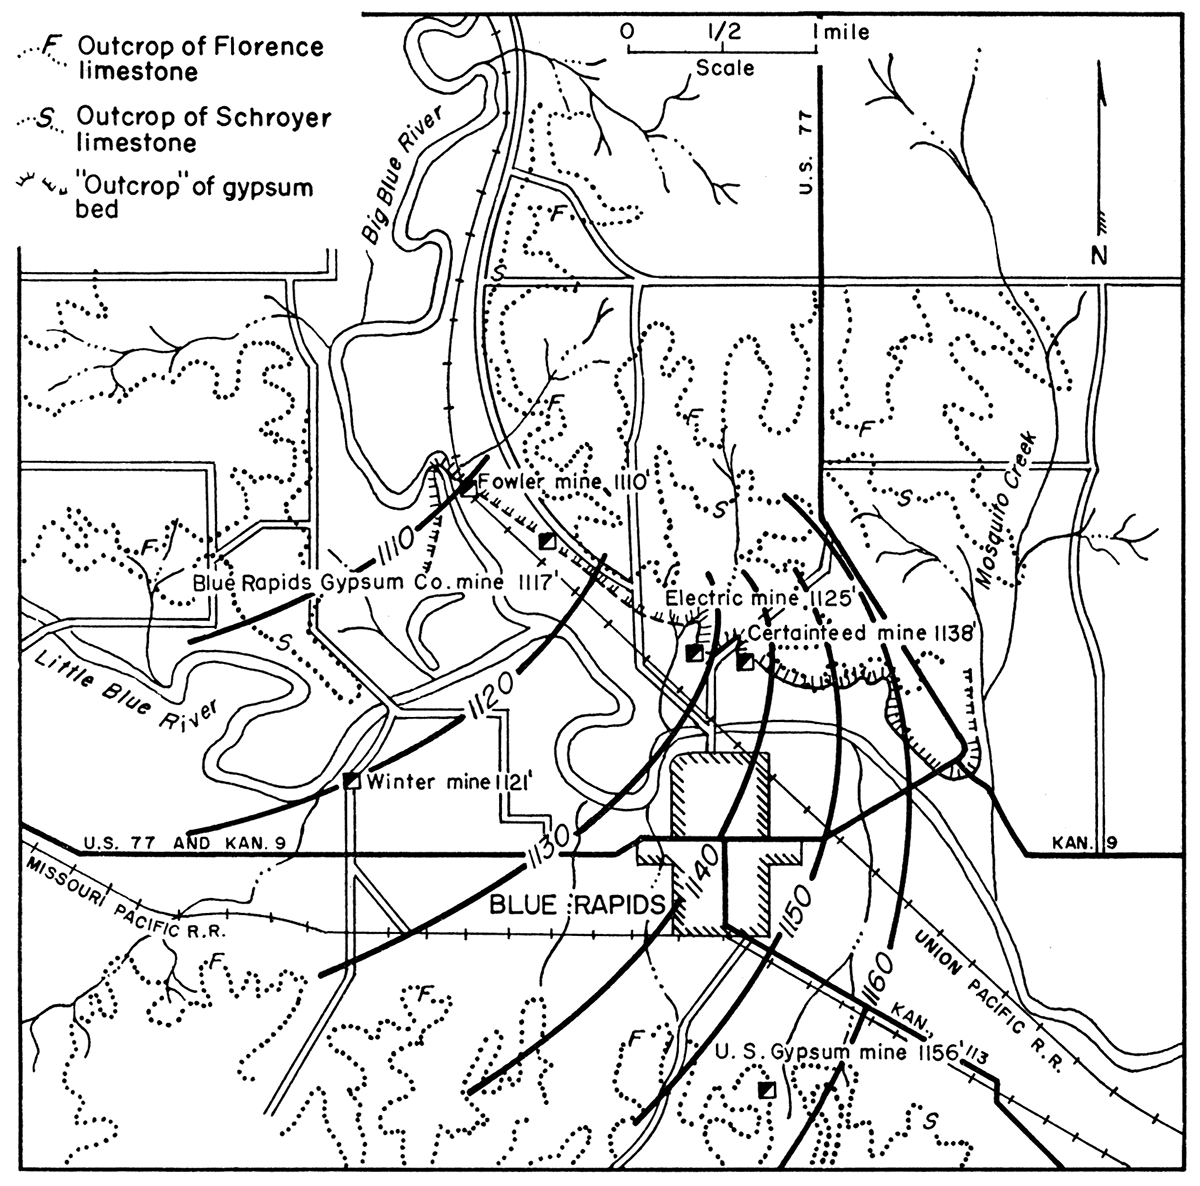 Map showing geology, structure, and location of mines in vicinity of Blue Rapids.